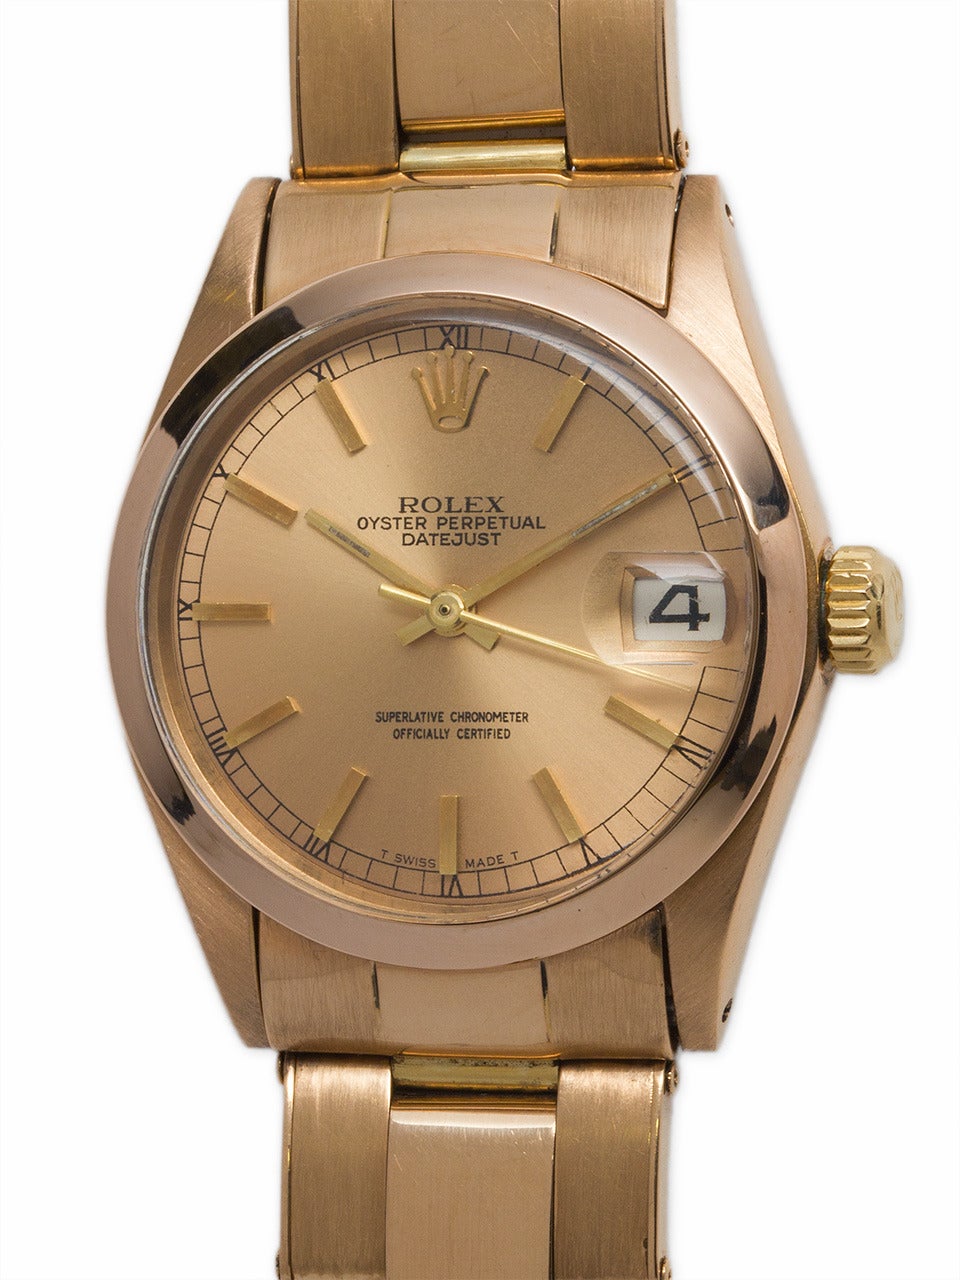 Rolex 18k rose gold midsize Datejust wristwatch, Ref. 6517, serial number 1.3 million, circa 1966. 31mm case with smooth bezel and rose dial with applied indexes. Self-winding movement with sweep seconds and date. With riveted link 18k rose gold